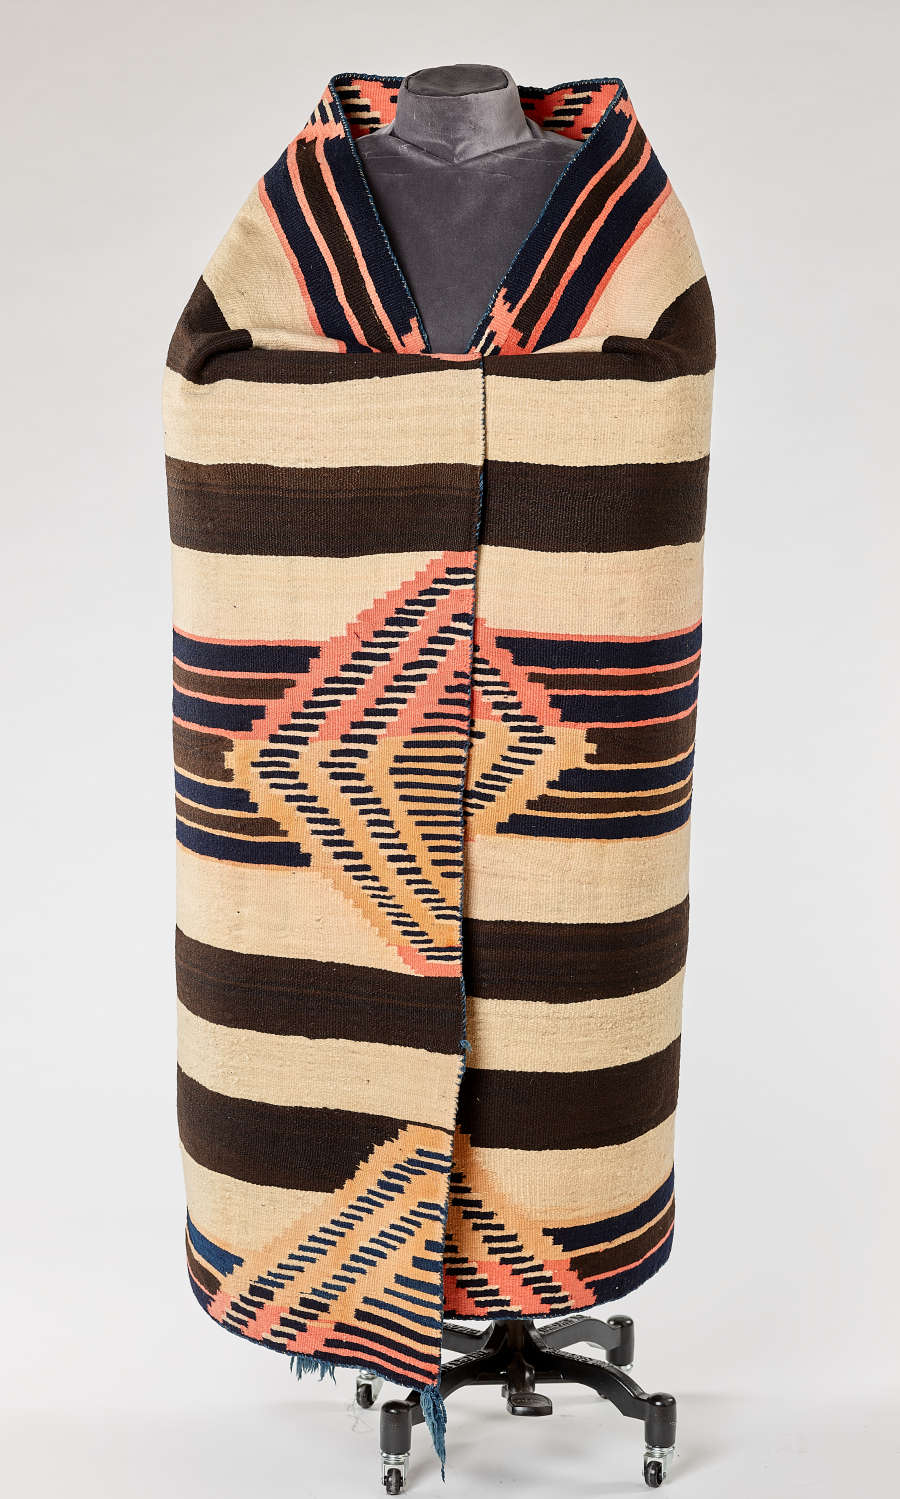 Black and cream striped woven blanket with salmon pink and yellow geometric patterns draped around a mannequin. The collar is symmetrical and the blanket end’s are overlapped and fastened.